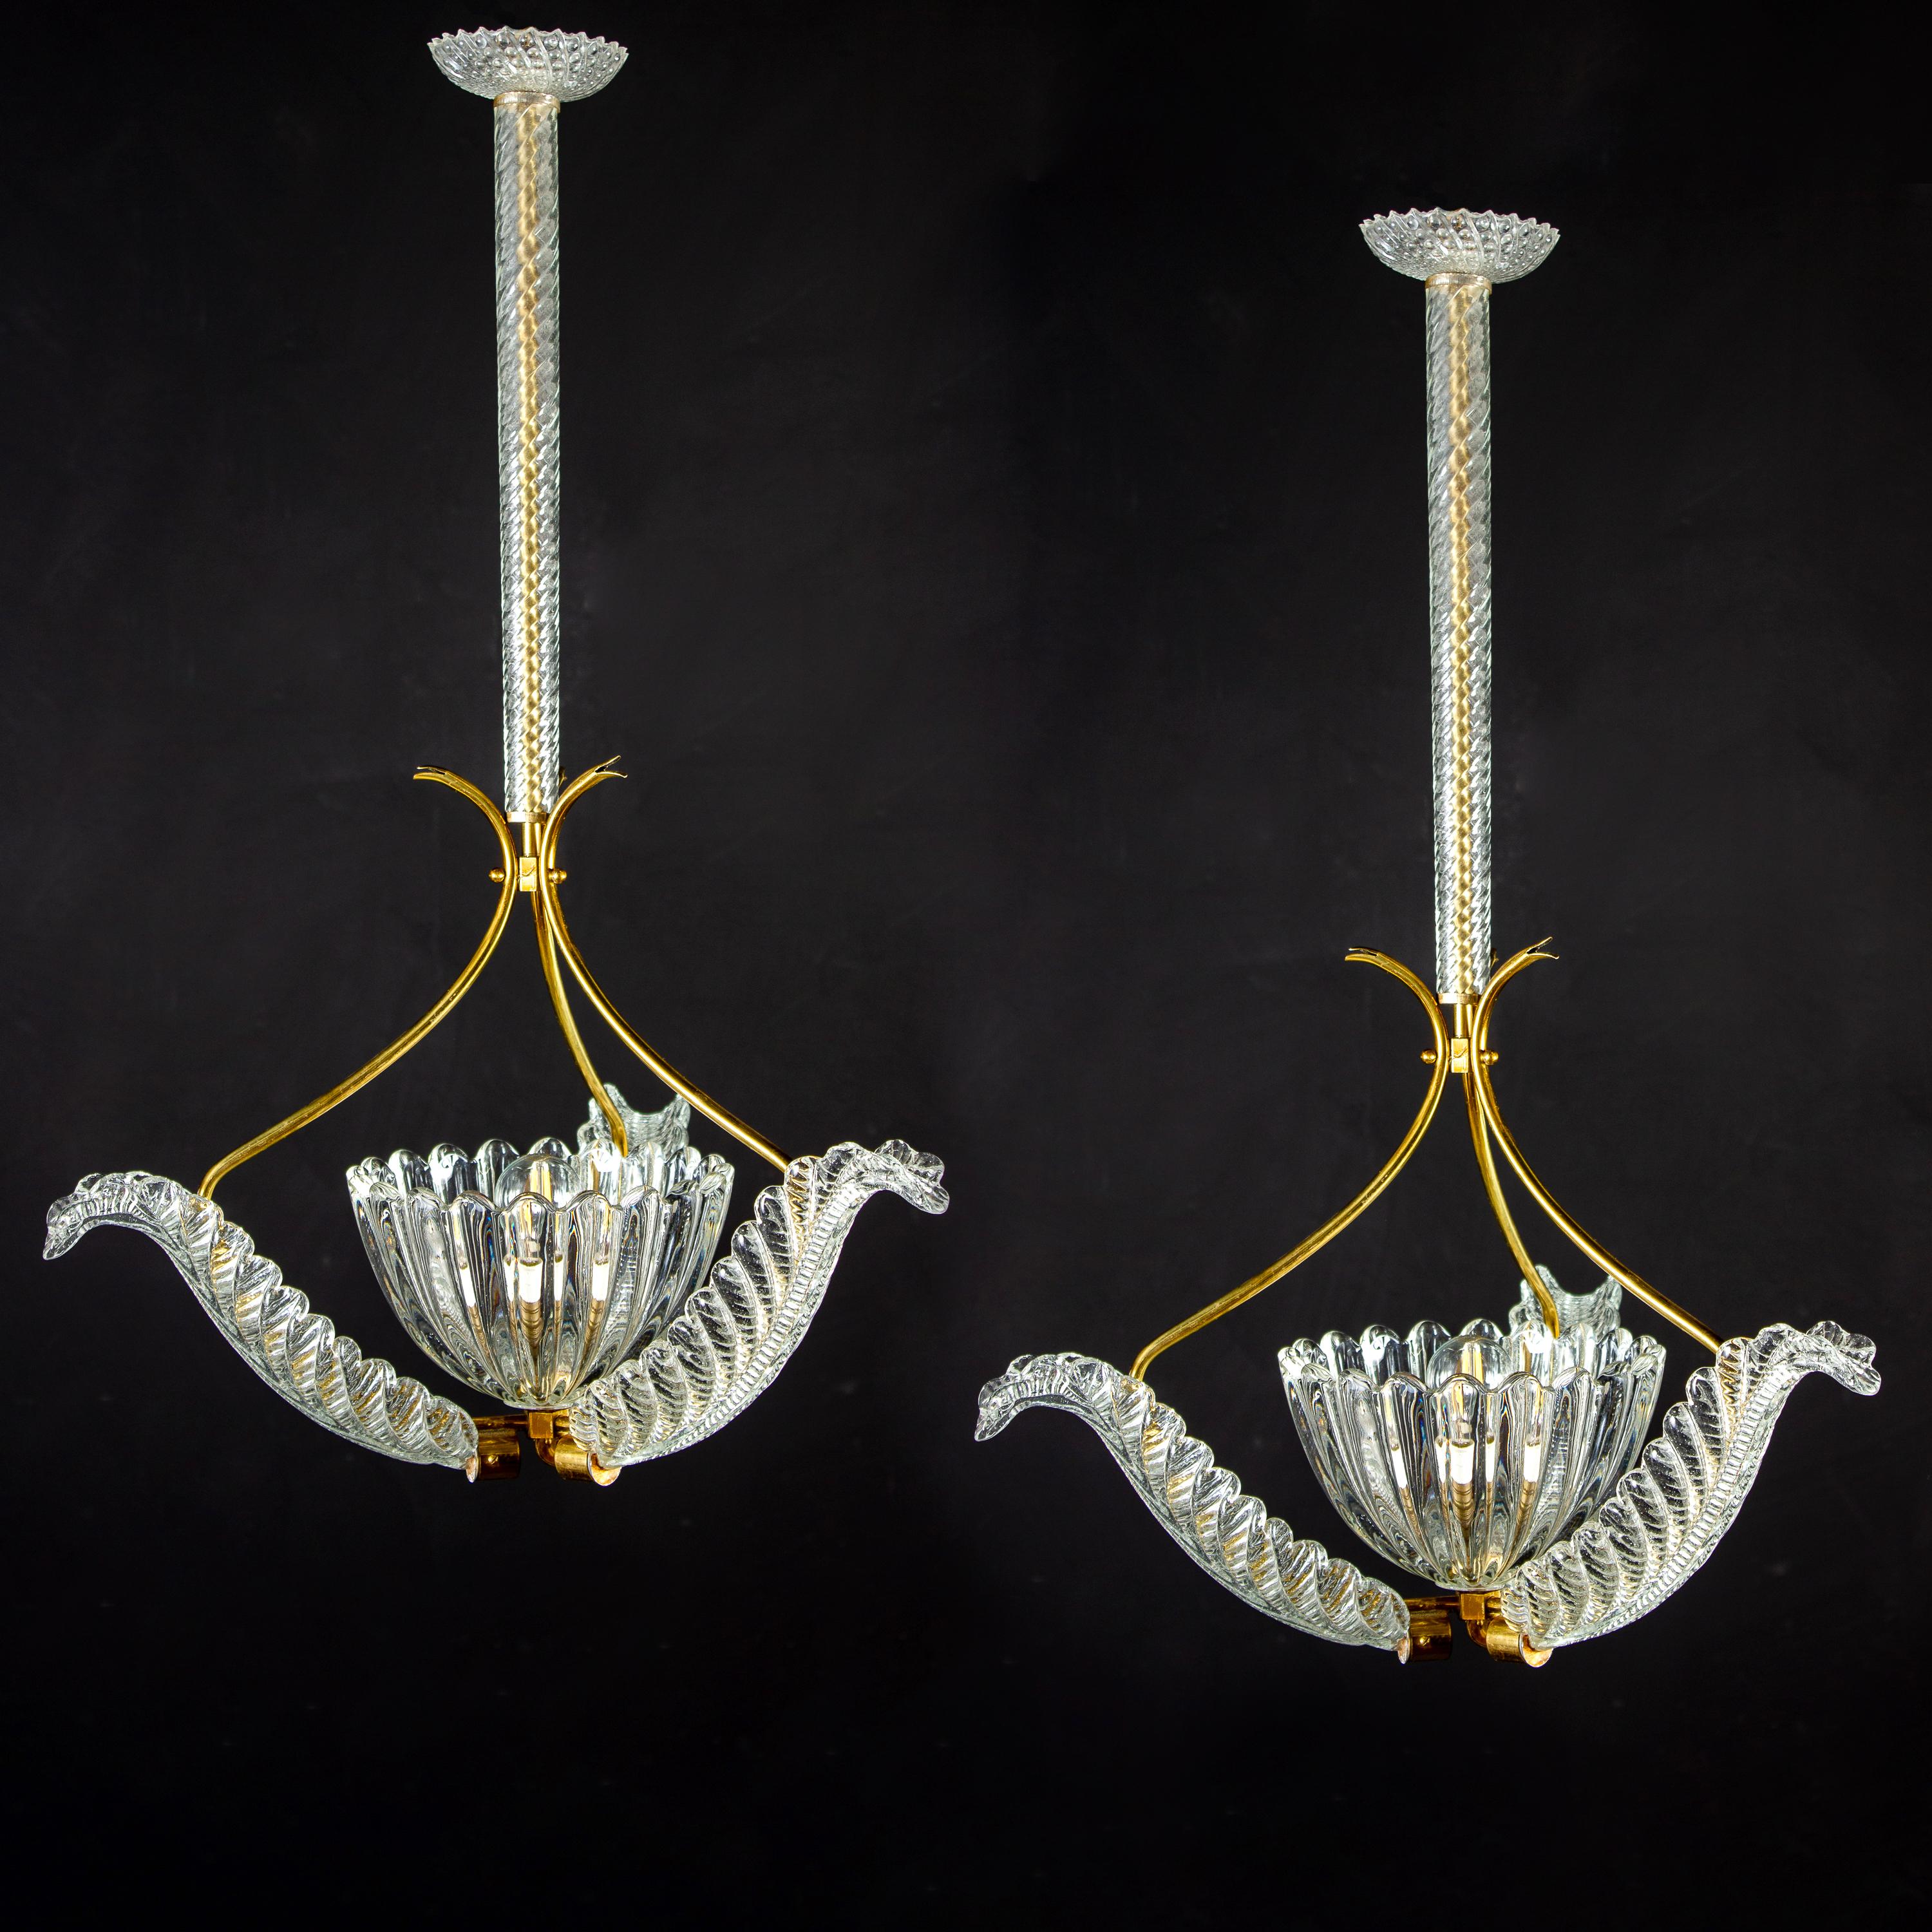 Elegant pair of liberty brass-mounted pendants by Ercole Barovier, 1940s.
Each with three precious Murano glass leaves centered by a hand blown elegant cup.
One E27 light bulb suitable for international standards.
  